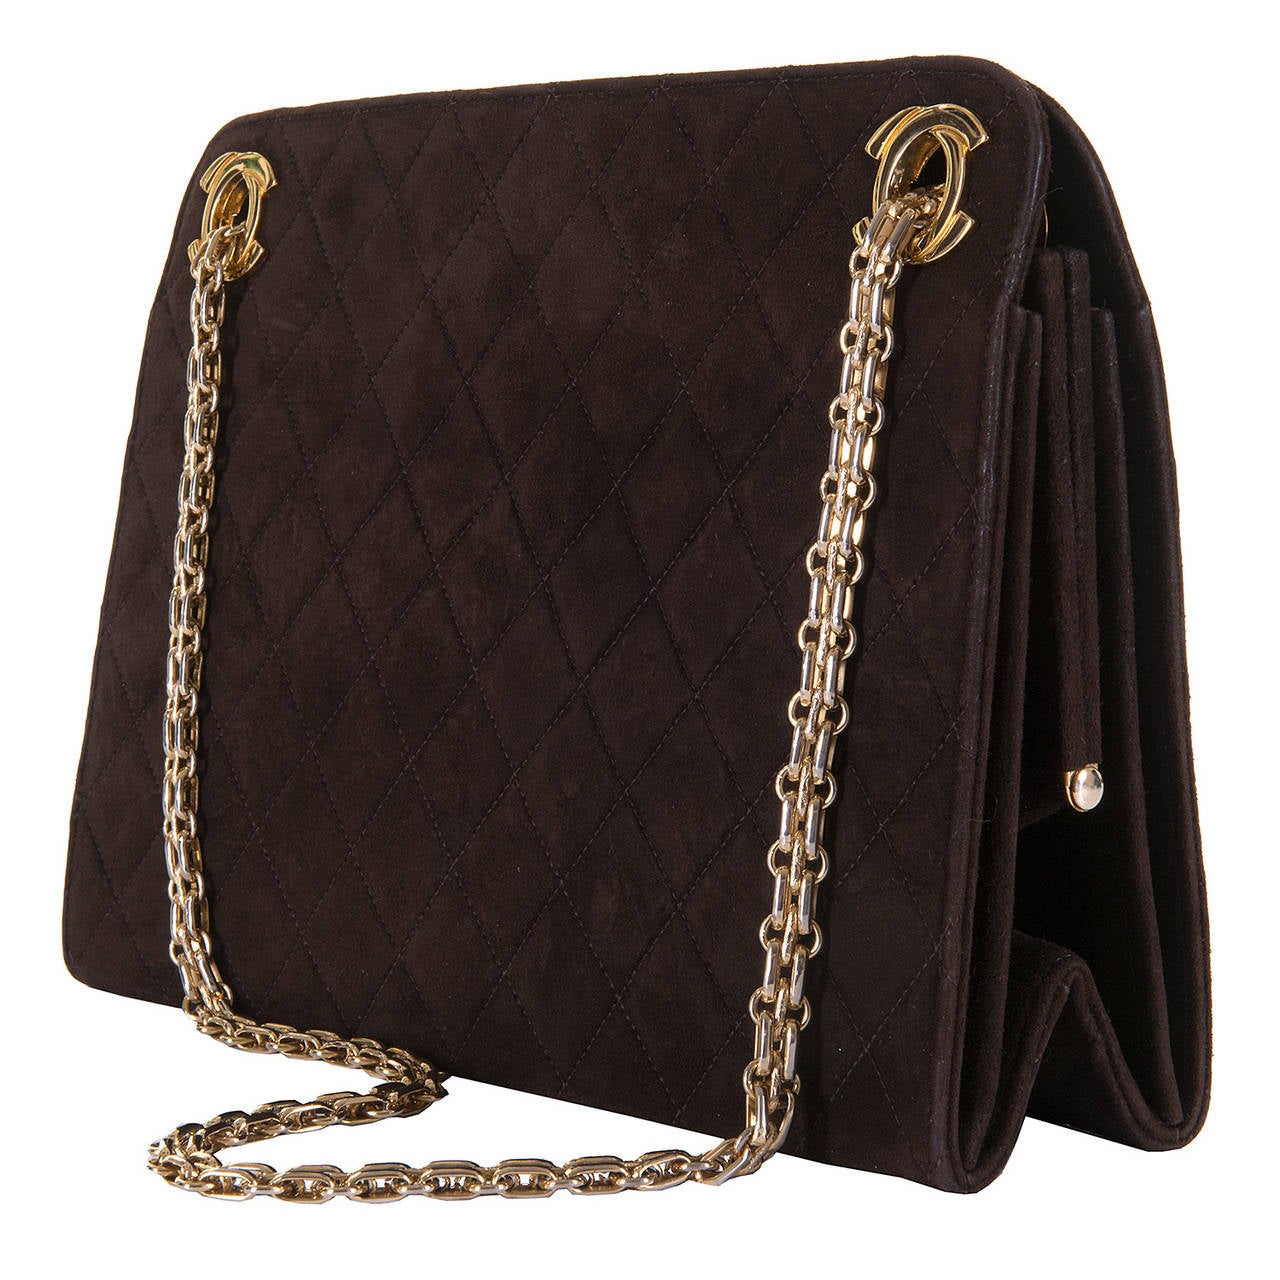 This fabulous Chanel Quilted Lambskin Suede Handbag in Chocolate Brown, with Gold-tone Hardware, comes with special order, double chain link straps,  and Iconic Chanel 'Double C' fittings. The bag's interior is finished in matching chocolate brown